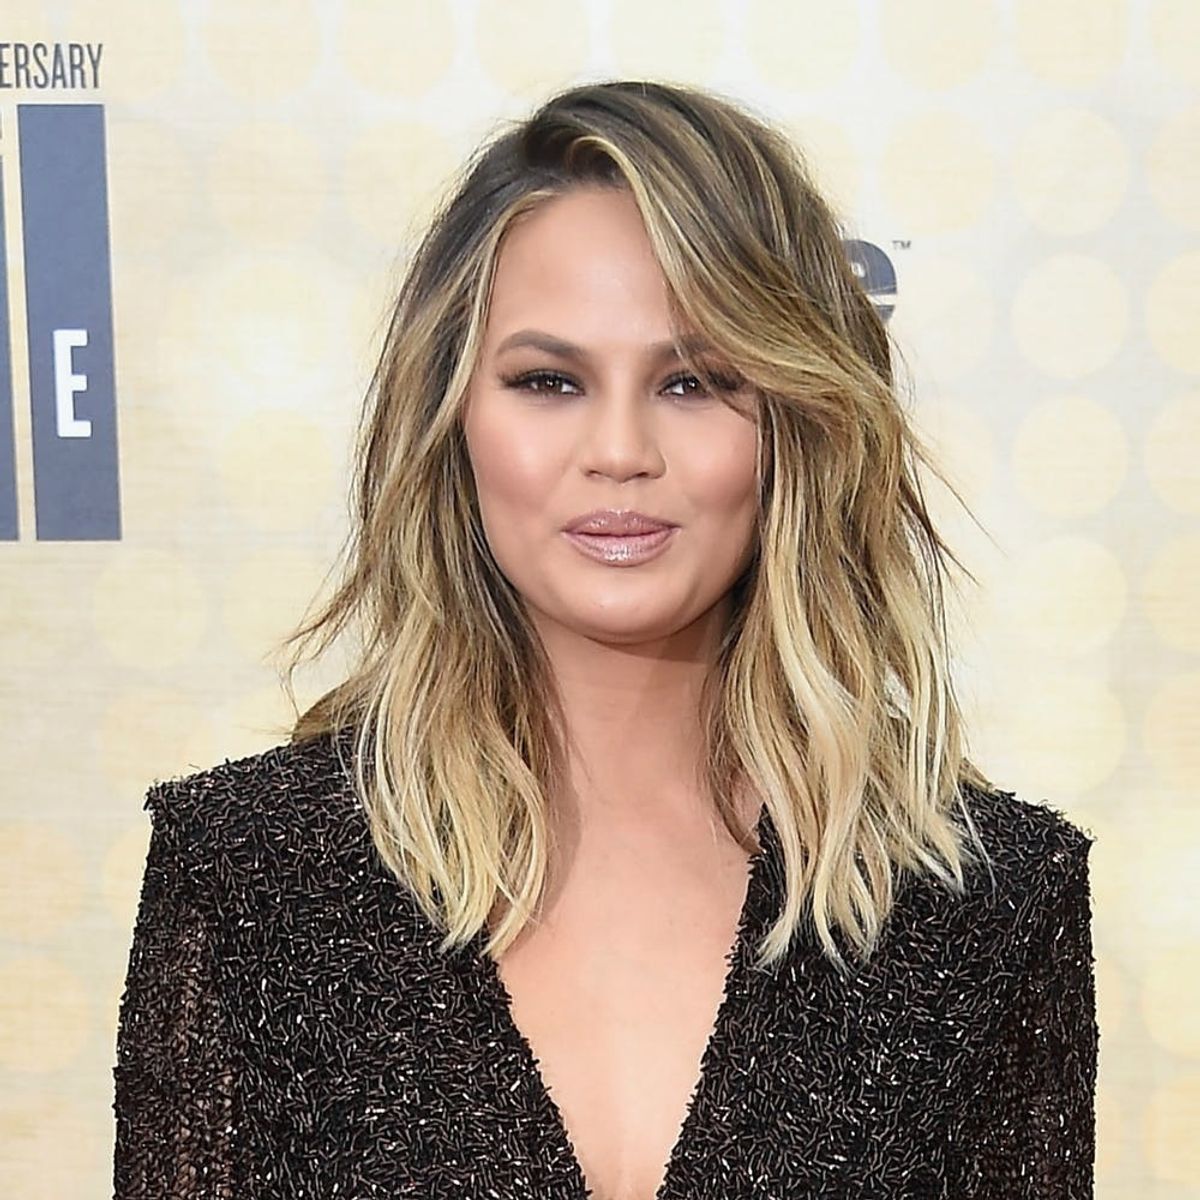 Chrissy Teigen May Have Just Won First Prize for the Best Disney Photo Ever